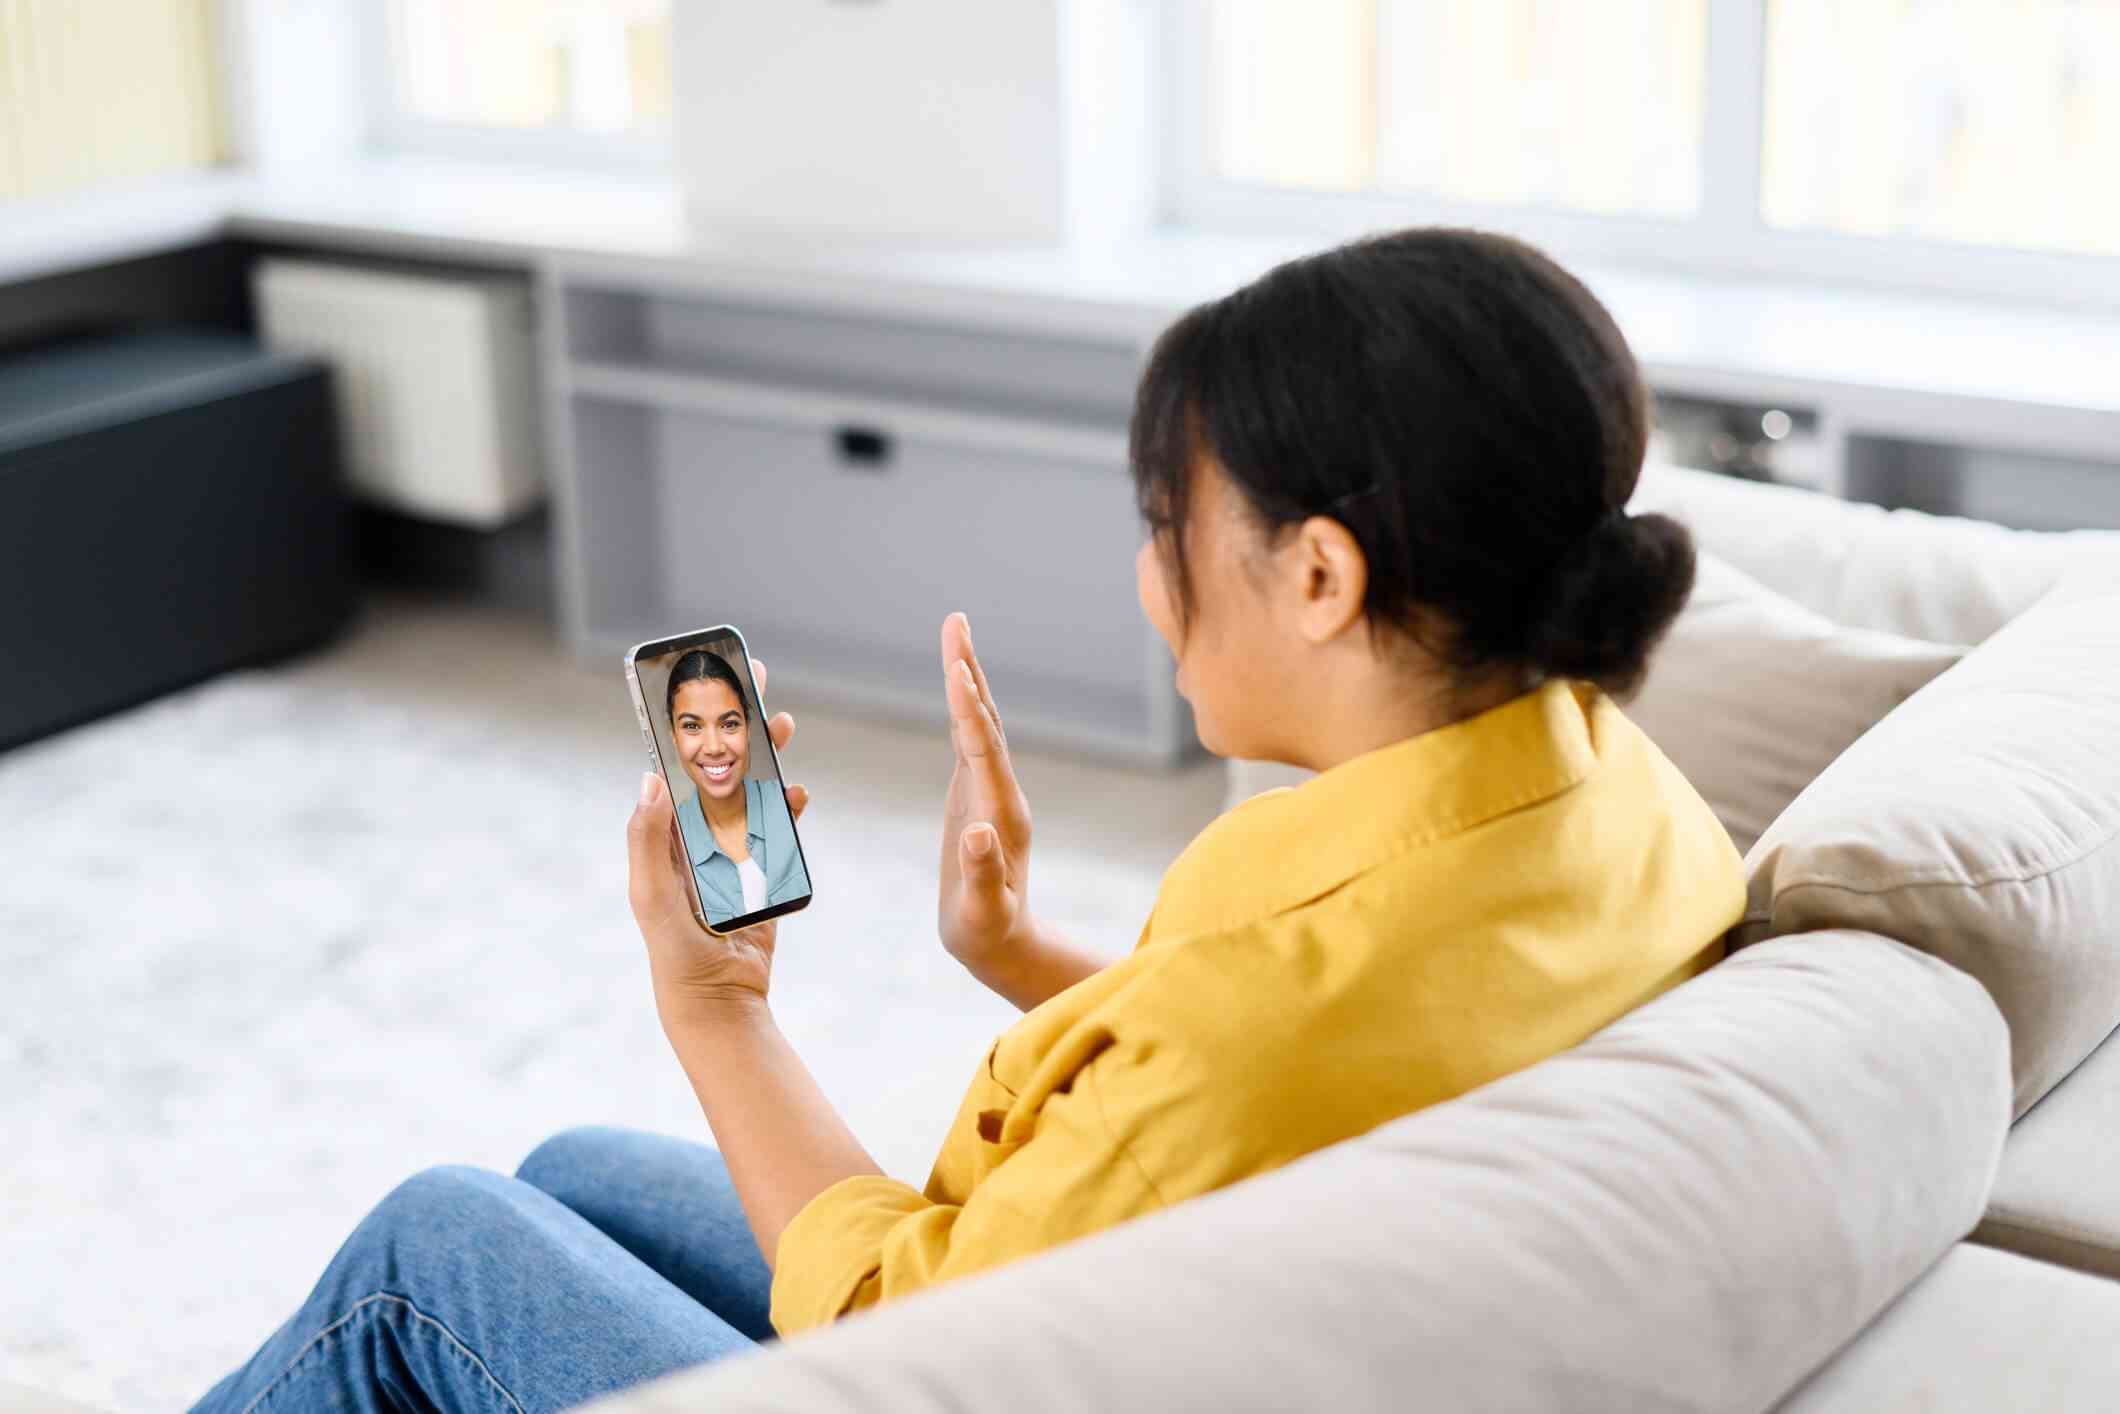 A woman in a yellow shirt sits on her couch and waves at her therpaist on the phone in her other hand during a virtual therpay session.